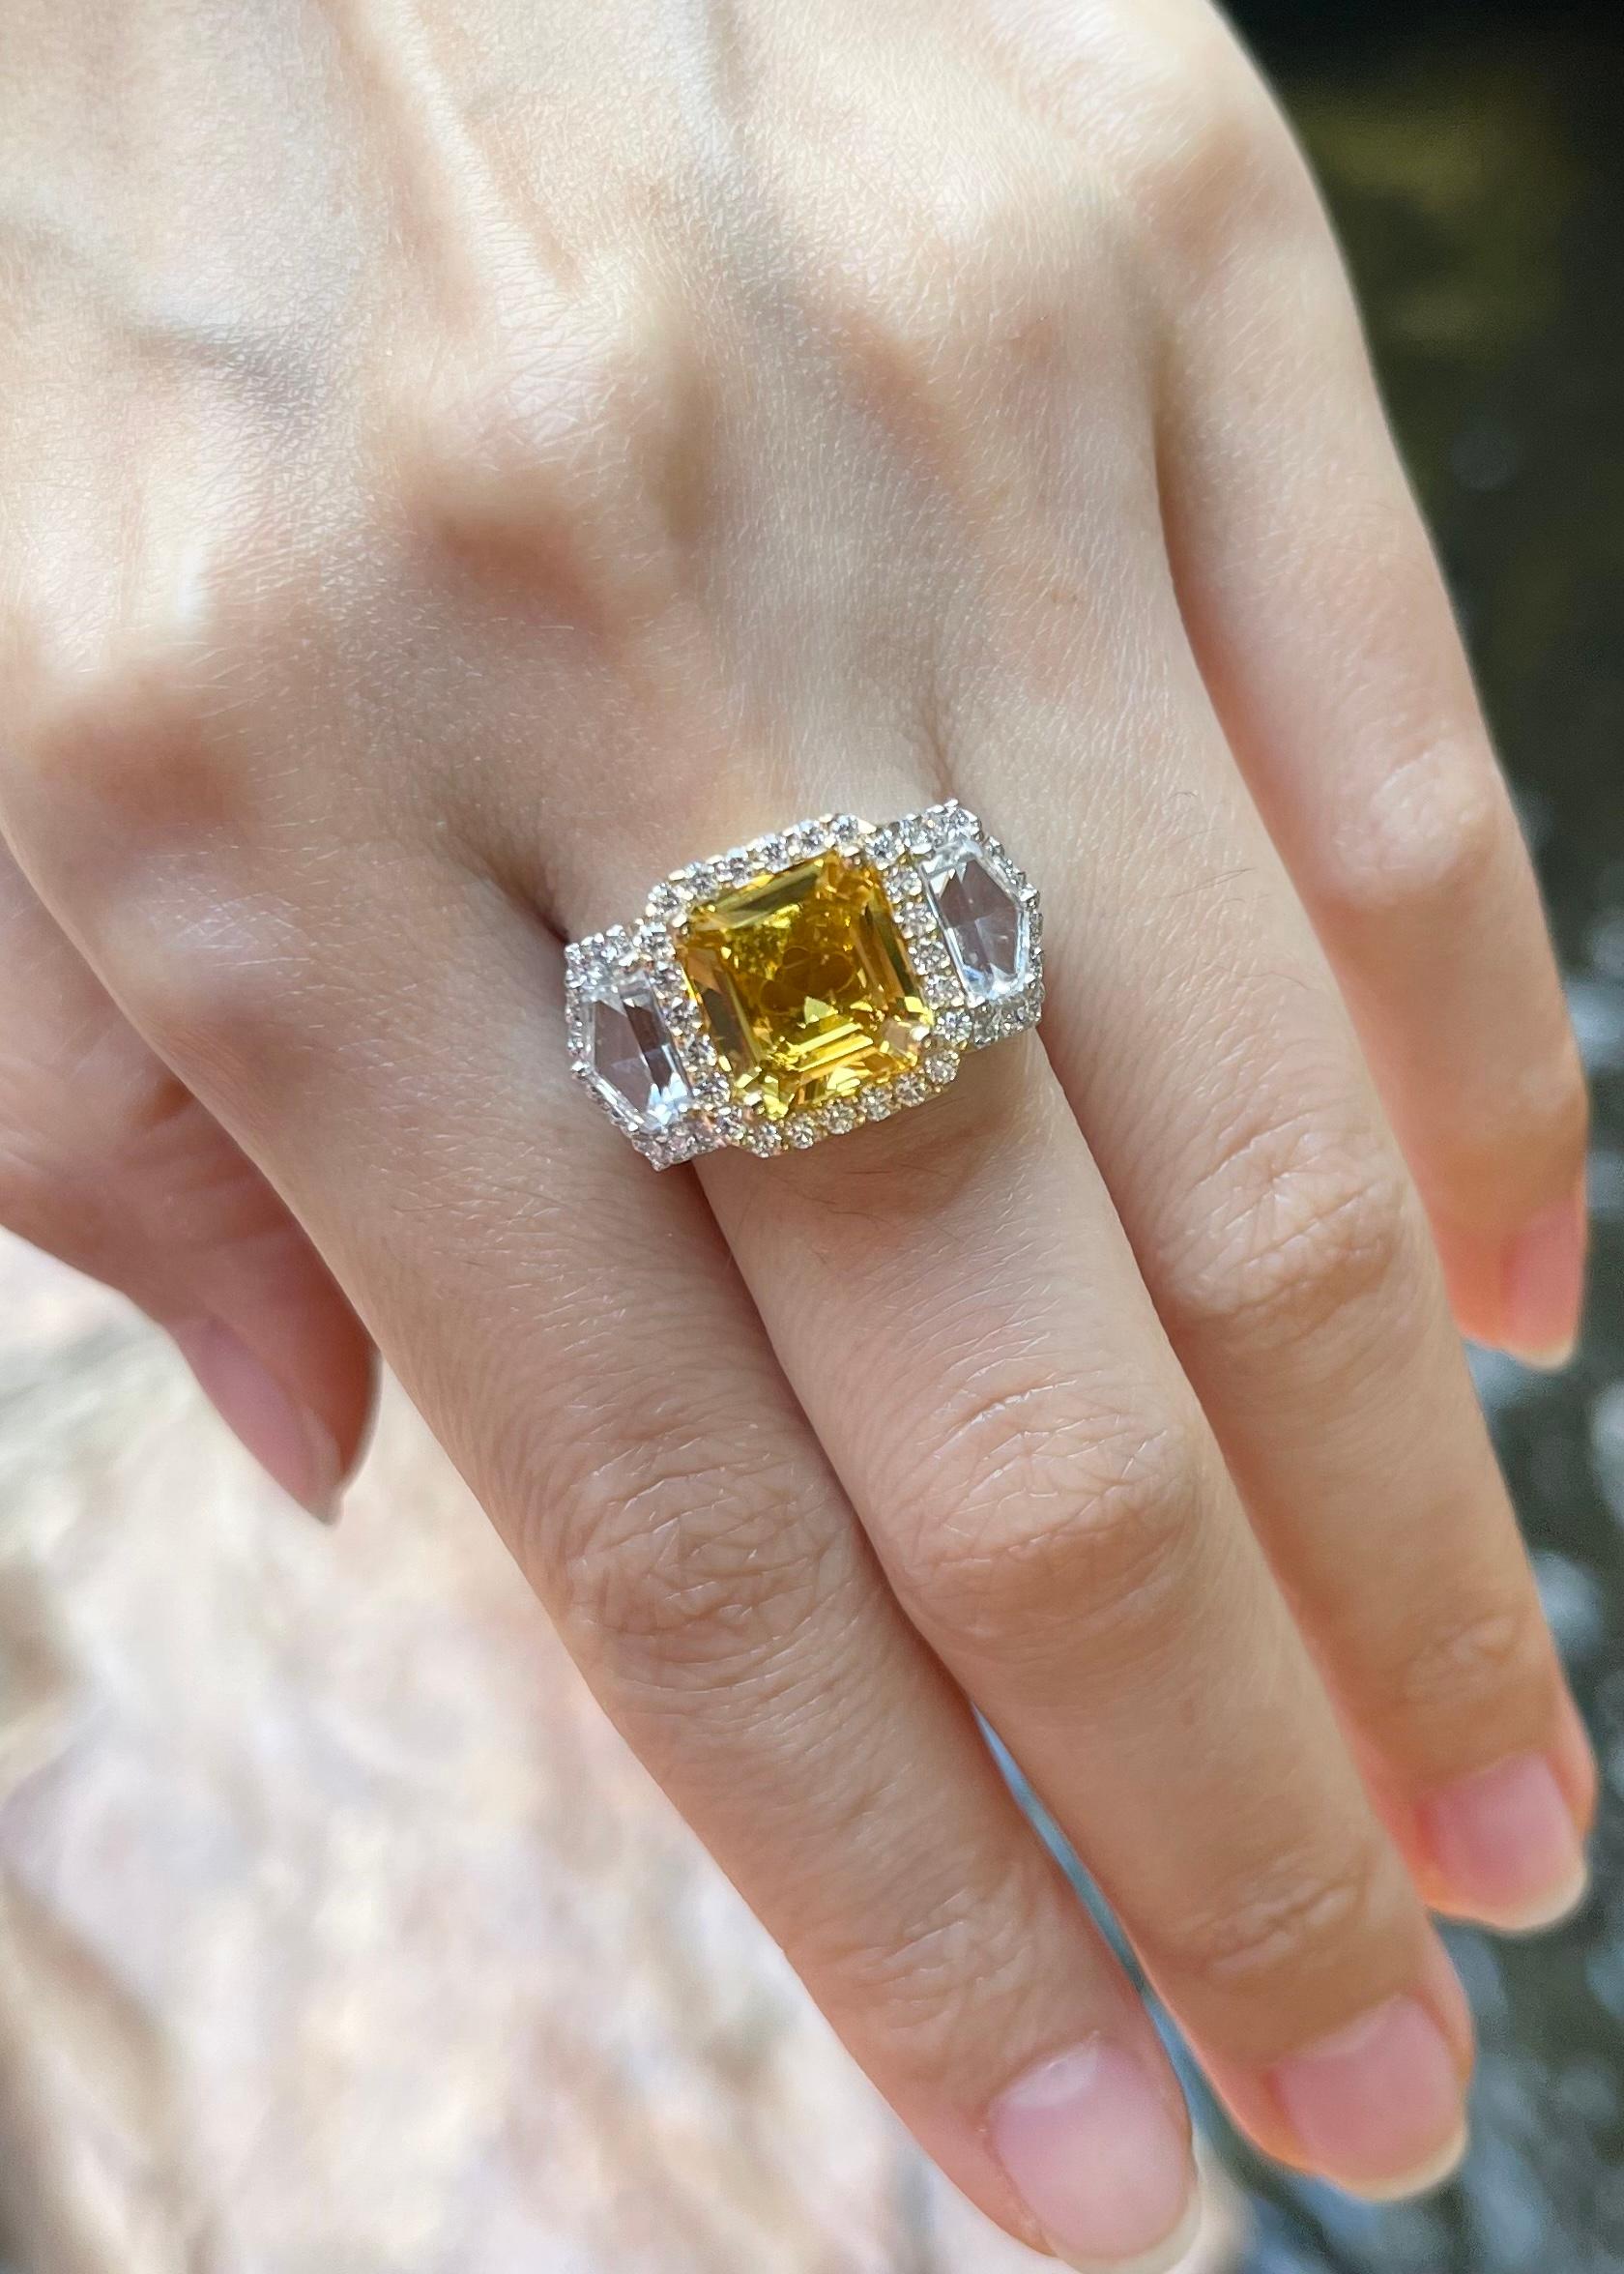 Yellow Sapphire 5.38 carat, White Sapphire 1.98 carats and Diamond 0.88 carat Ring set in 18K White Gold Settings

Width:  2.2 cm 
Length: 1.3 cm
Ring Size: 55
Total Weight: 9.83 grams

